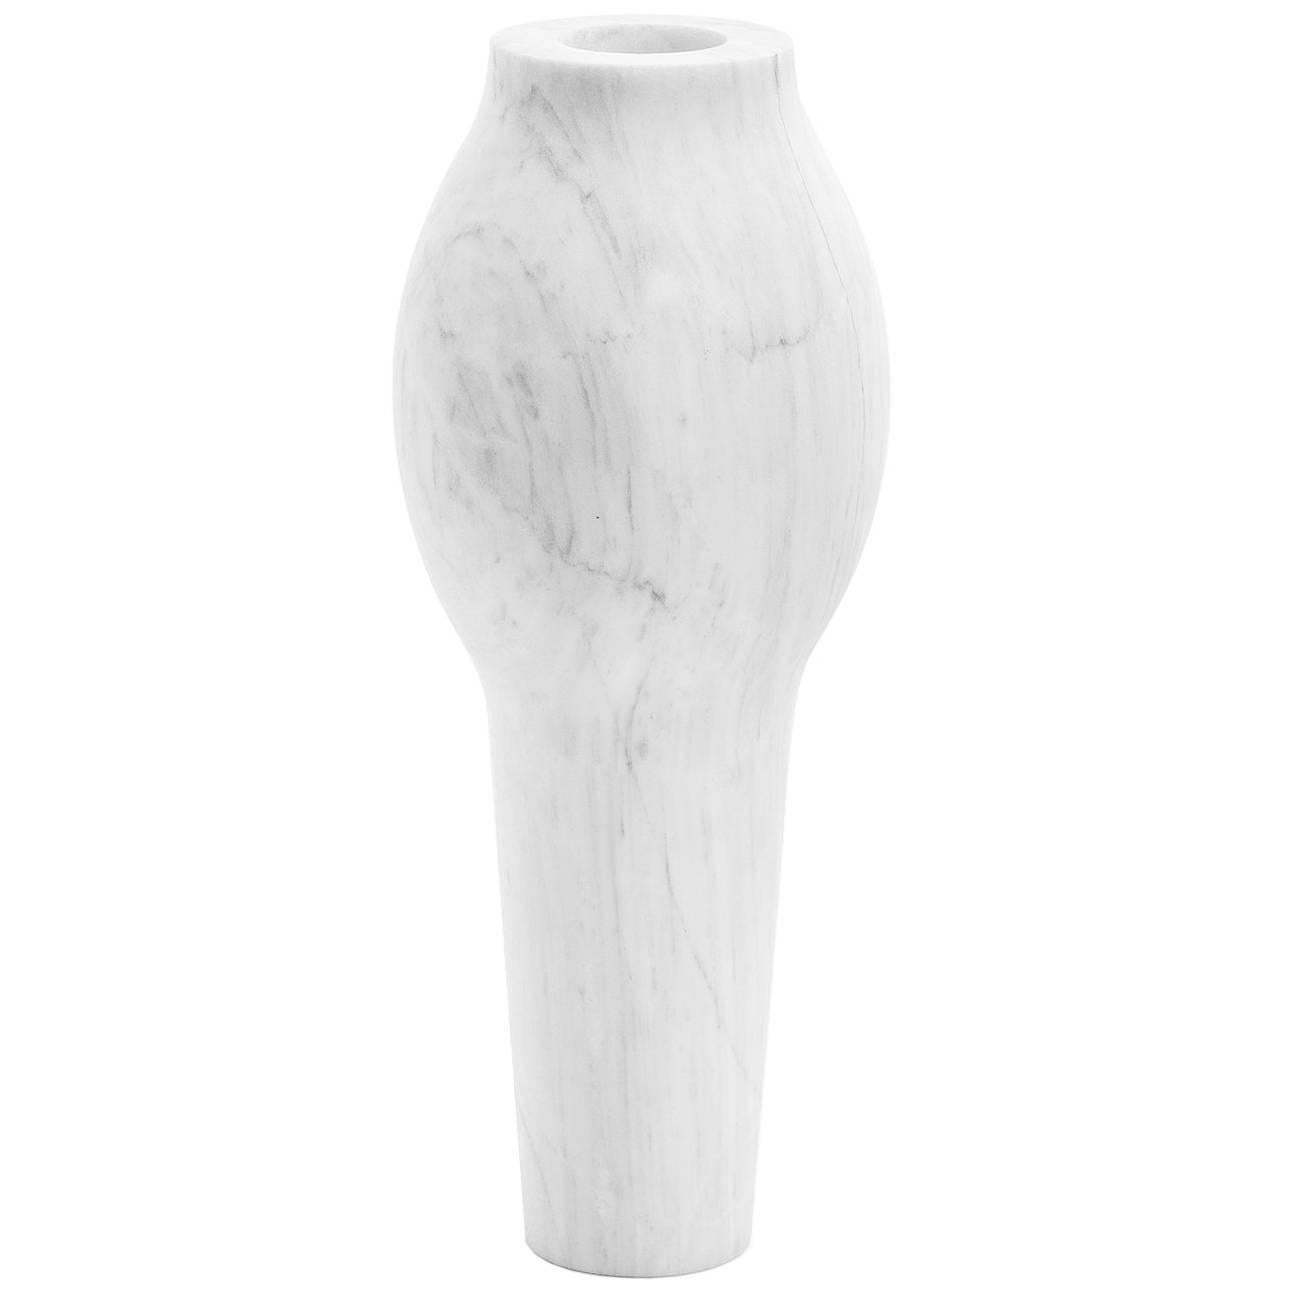 S.R.O Rito White Marble Vessel #1 ( Large ) by Ewe Studio For Sale